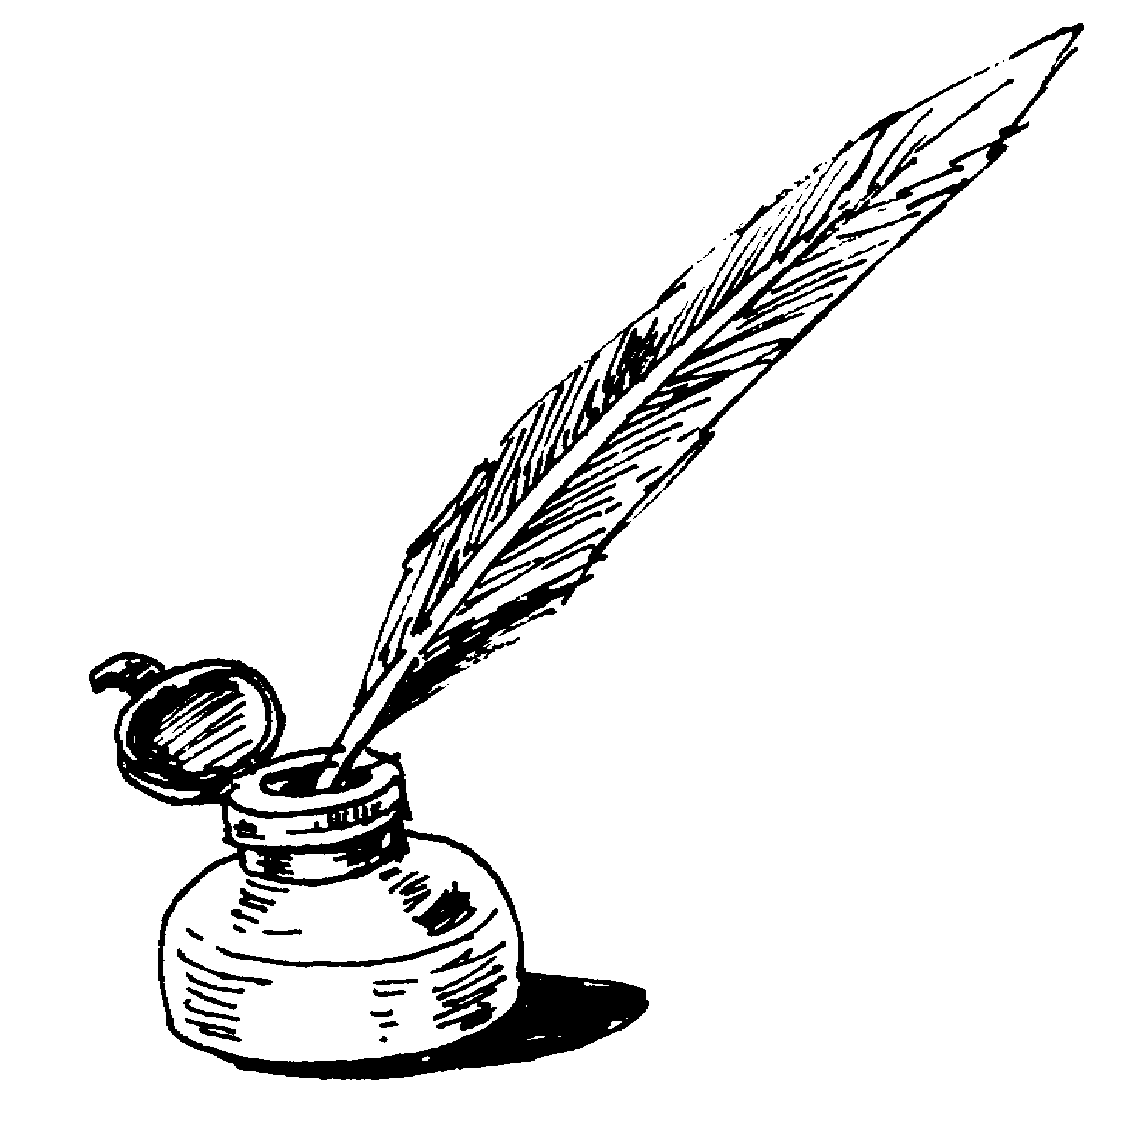 Ink pen image quill and ink clipart clipart